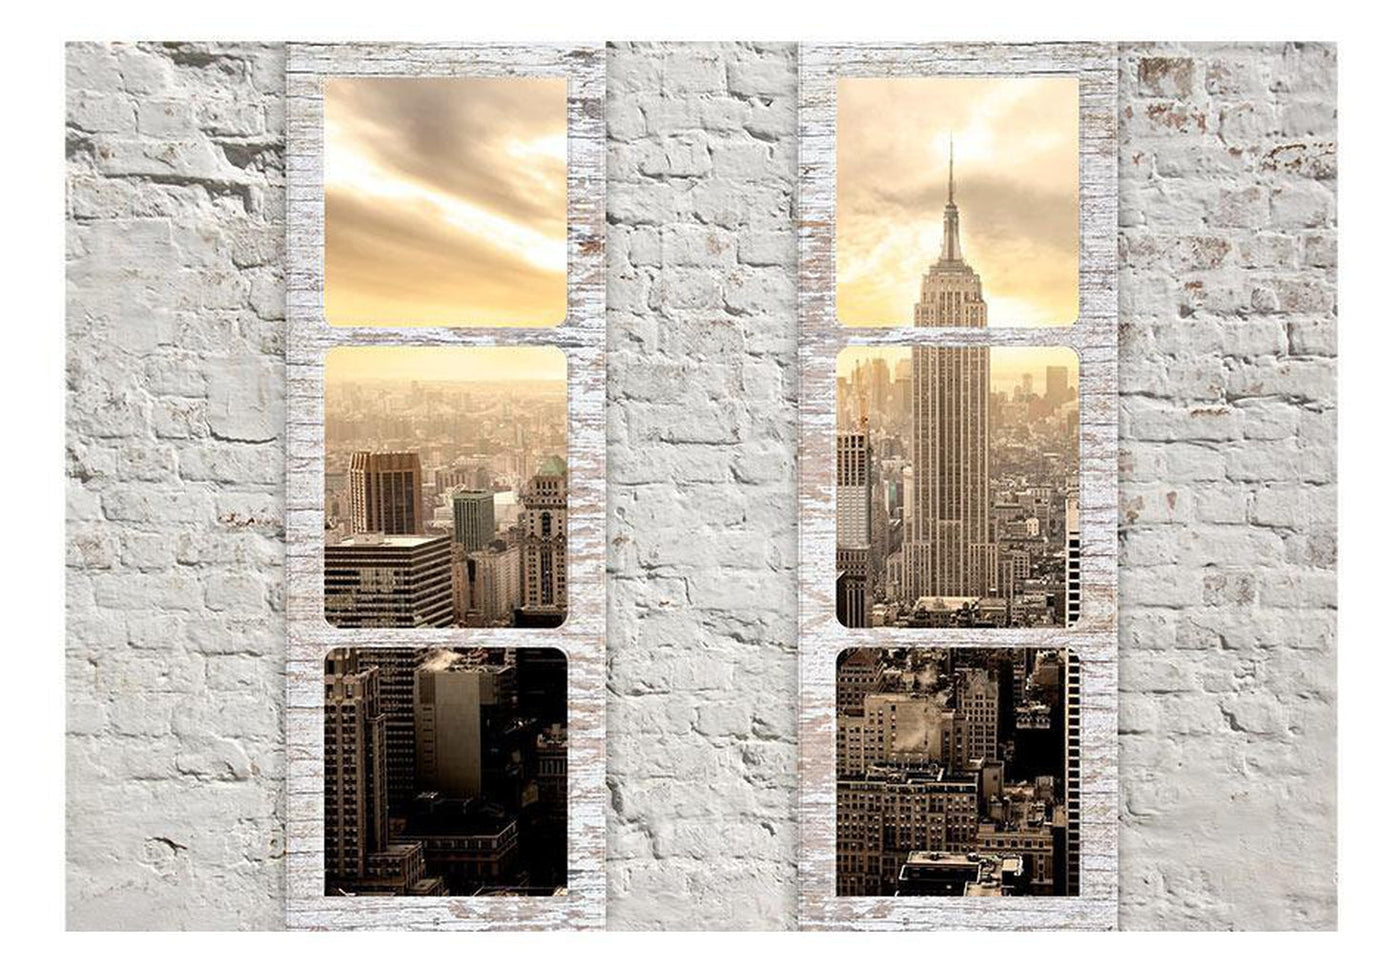 Wall mural - New York: view from the window-TipTopHomeDecor